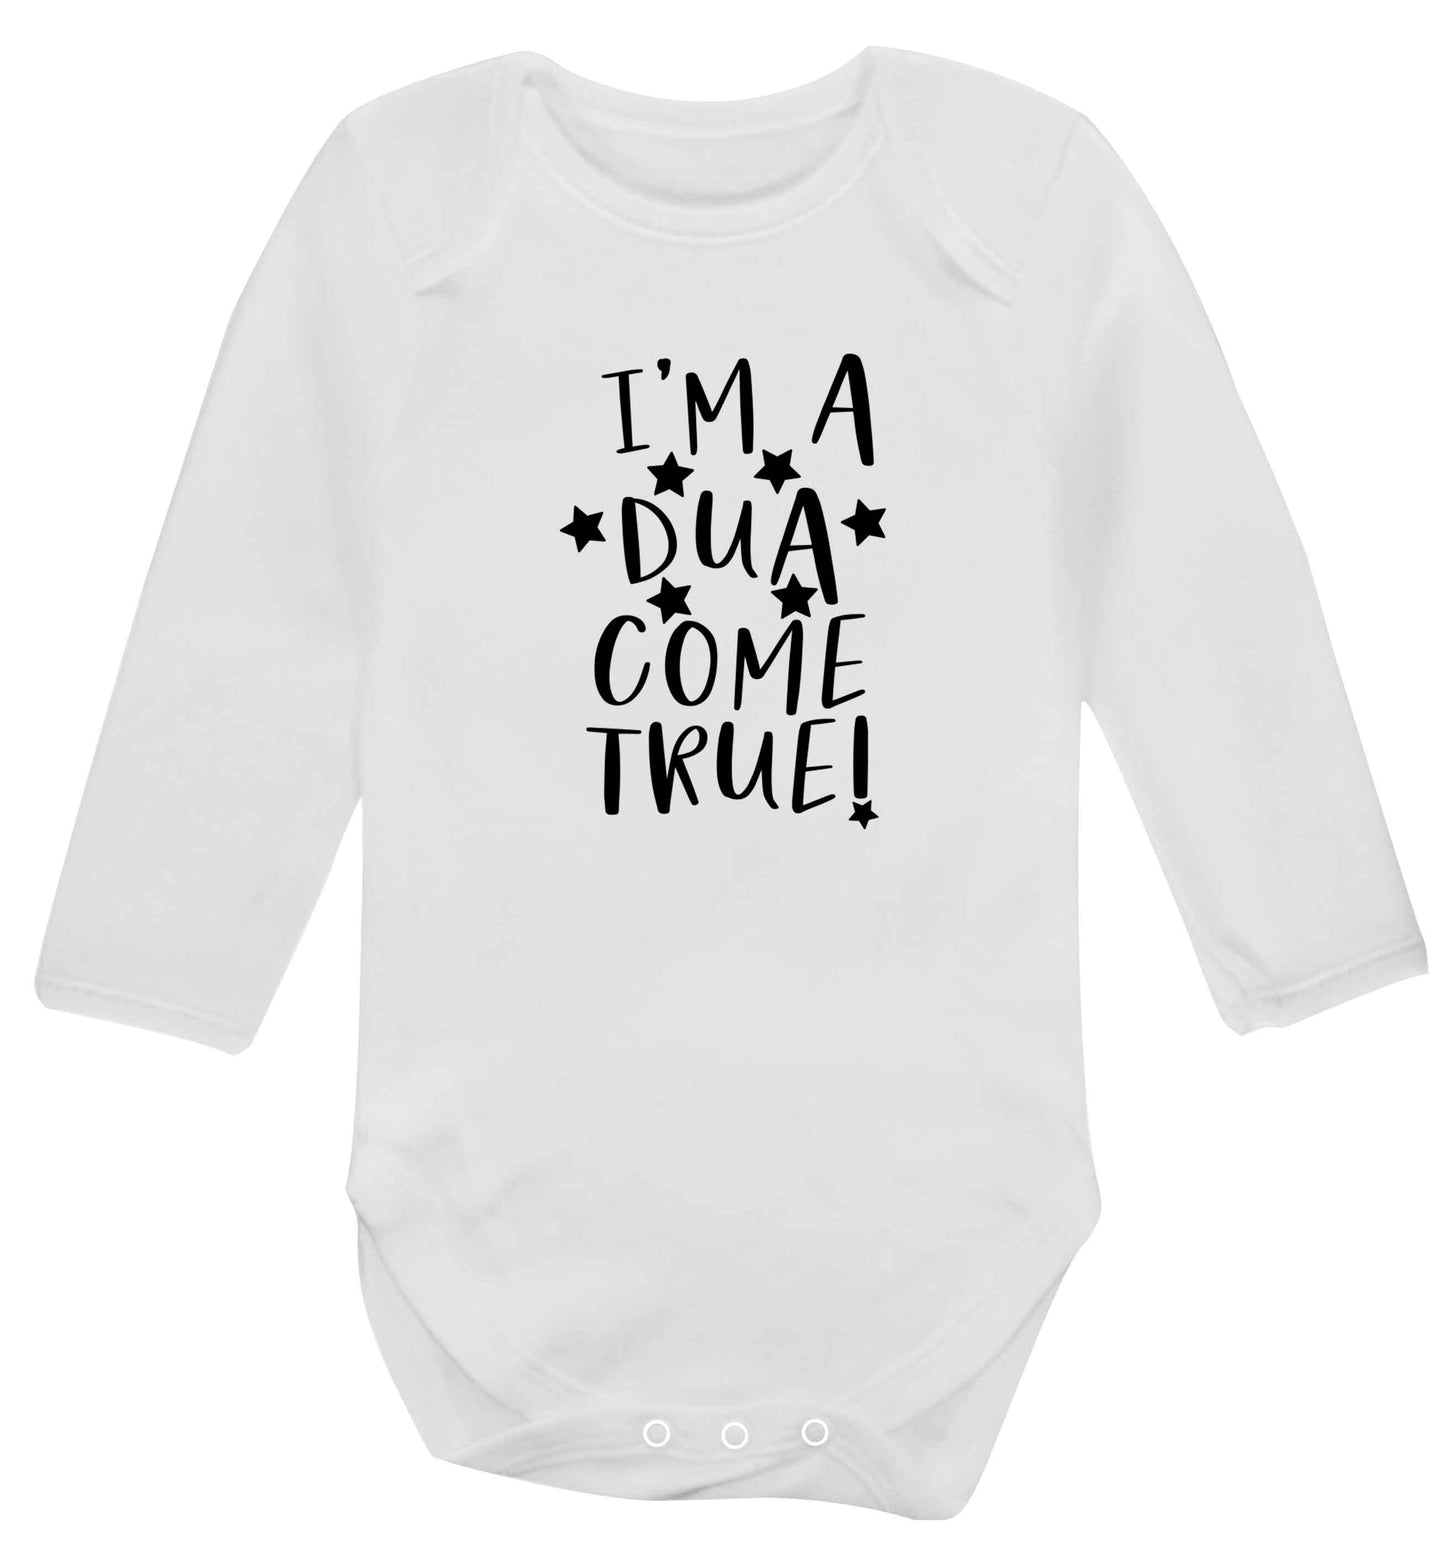 I'm a dua come true baby vest long sleeved white 6-12 months